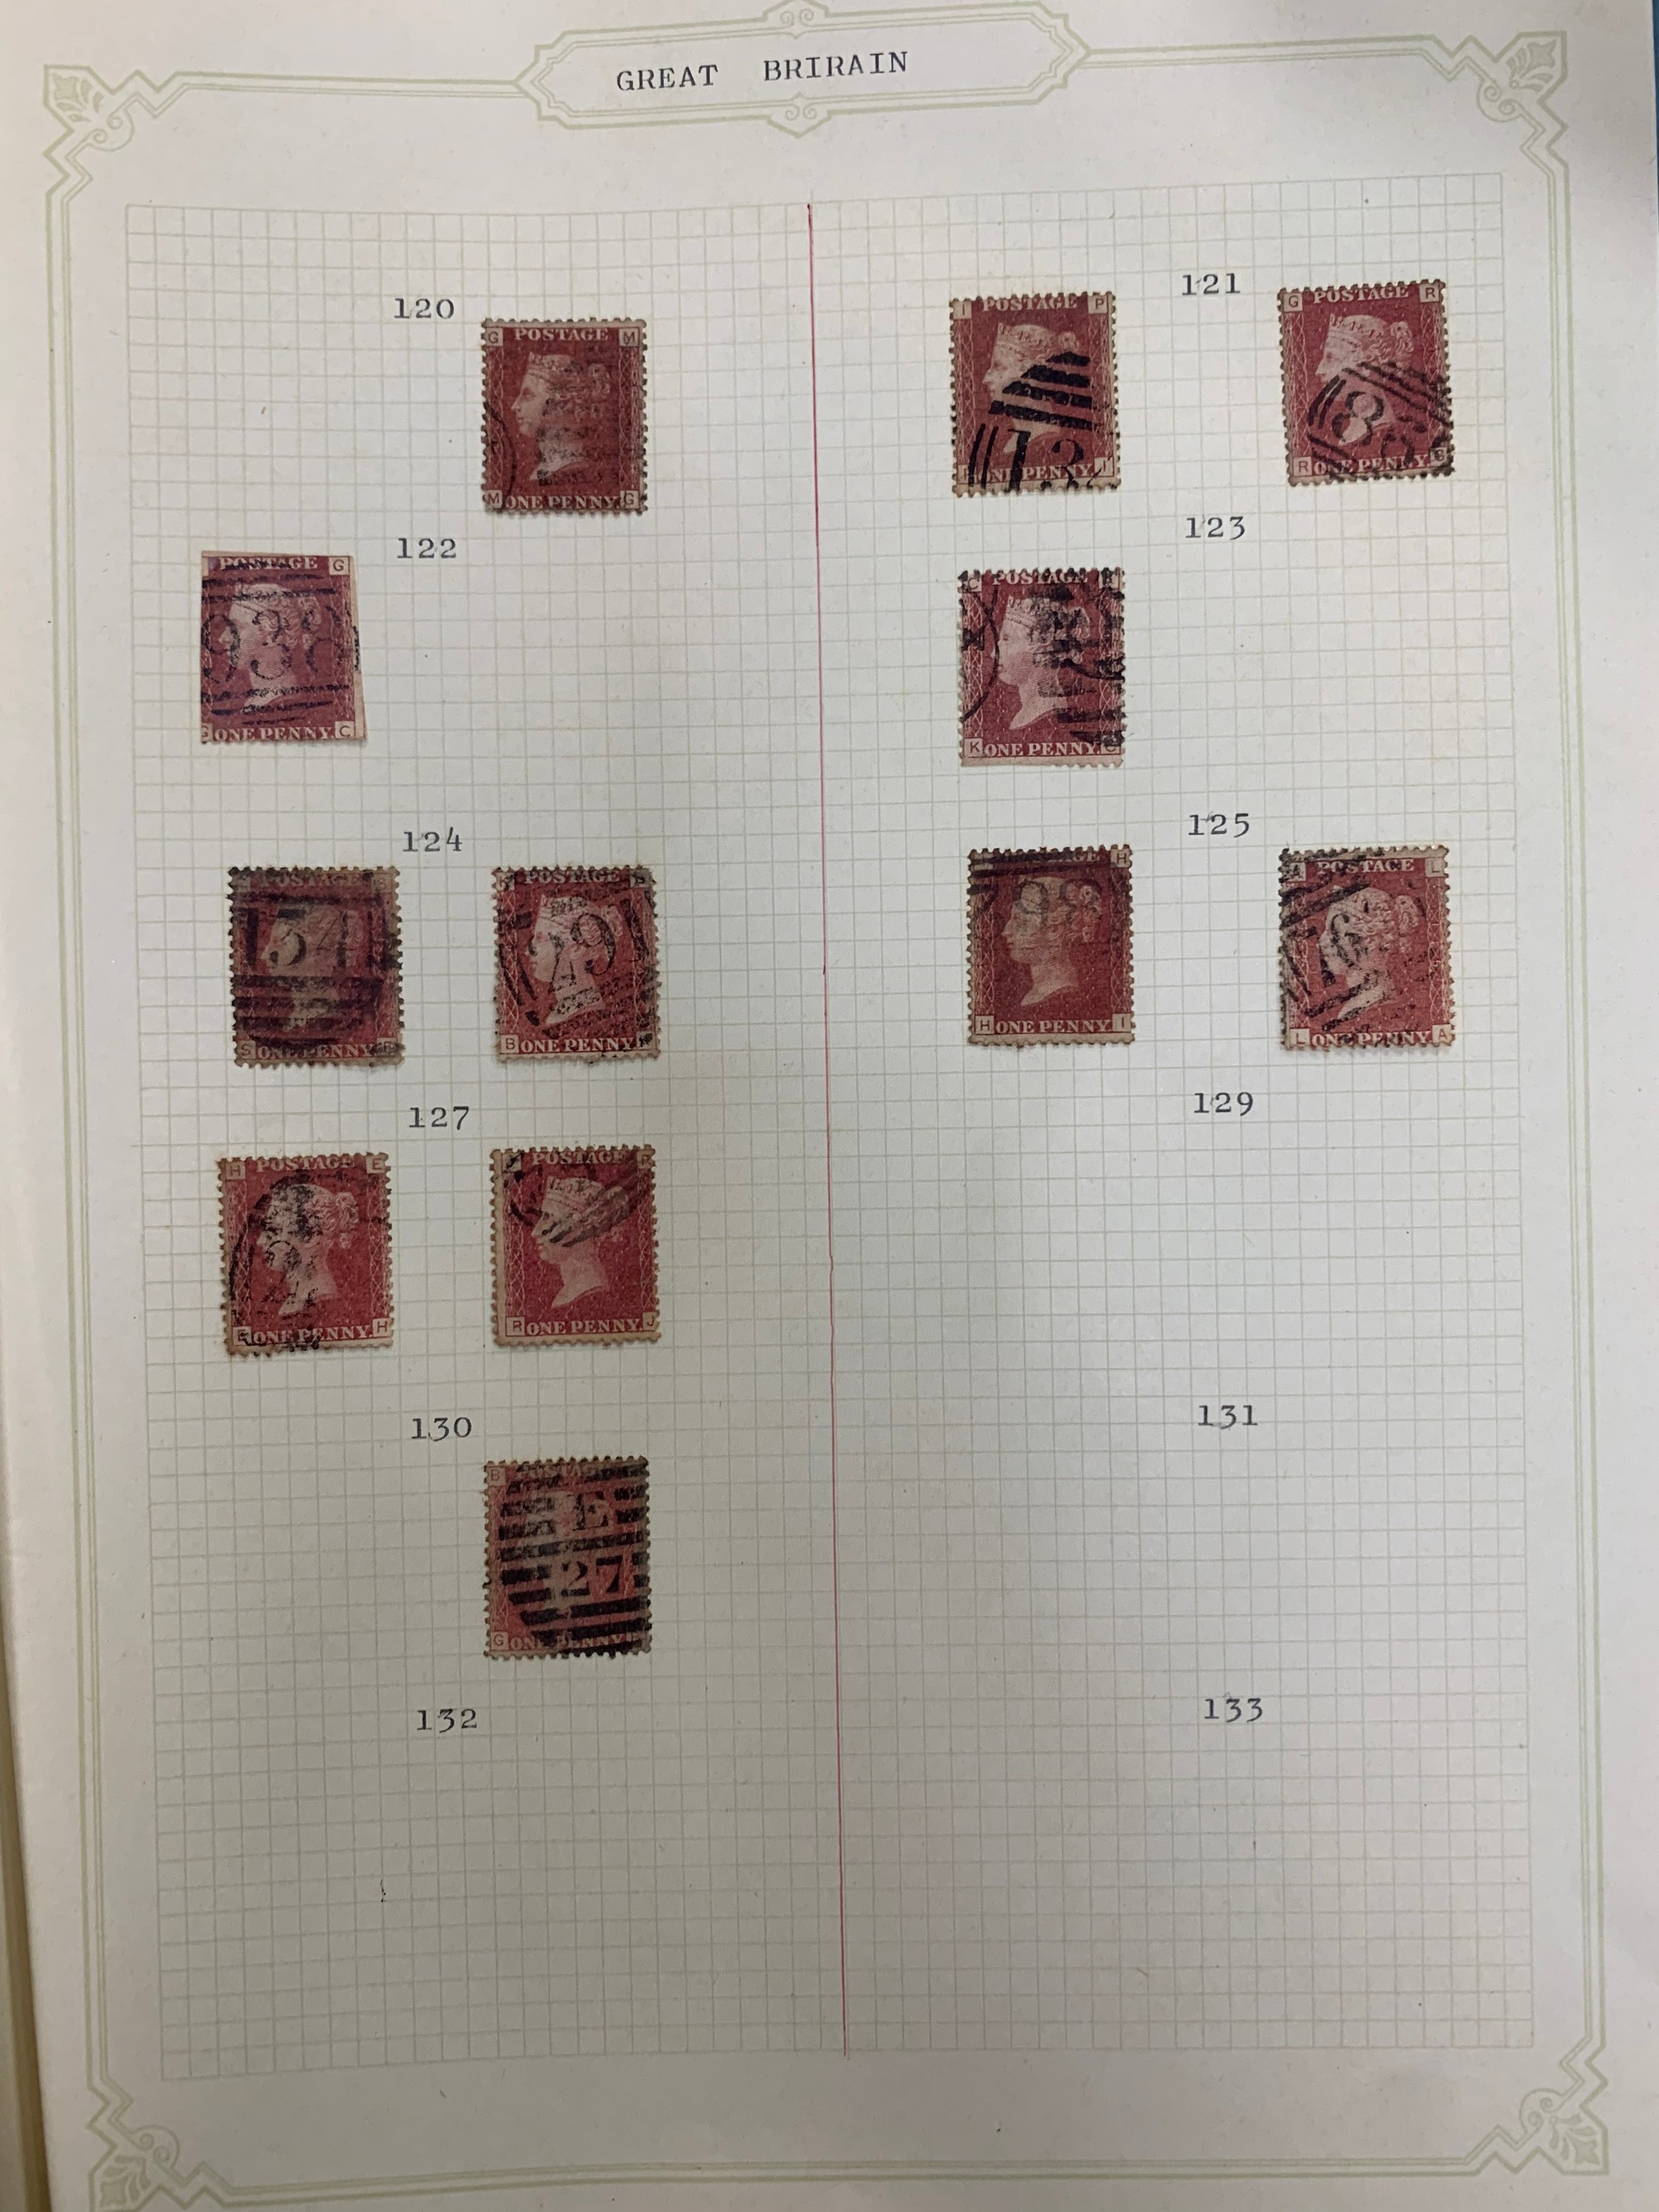 Great Britain, 1858-64 annotated and well-laid out collection of 1d Penny Reds FU from plate 73 to - Image 4 of 12